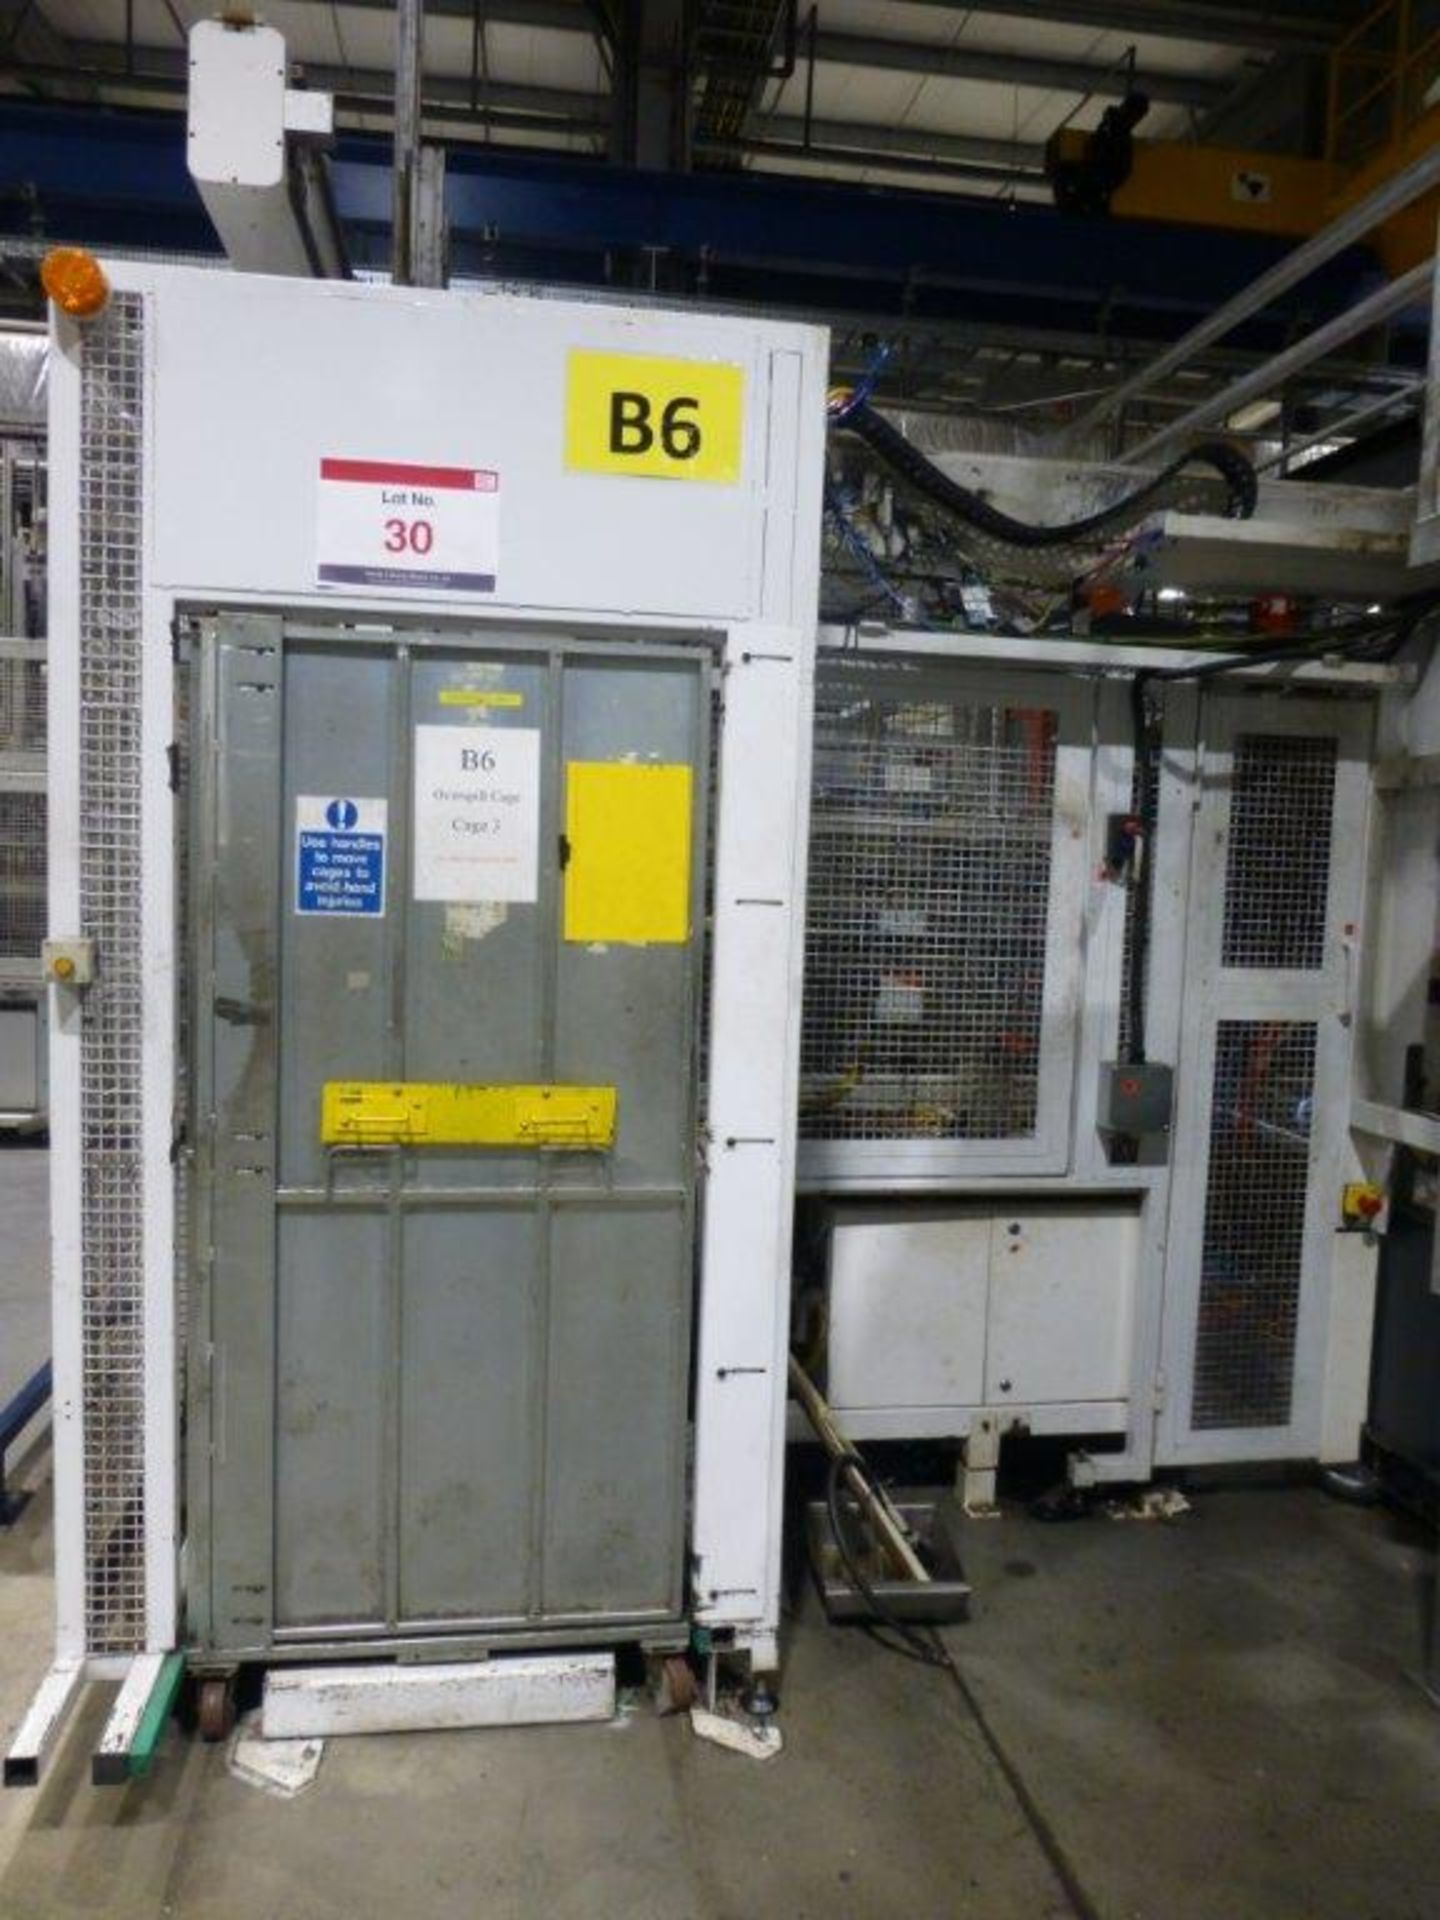 GMAT Model M53 CNC automated DVD case twin arm picking/stacking system with case closure unit, - Image 4 of 8